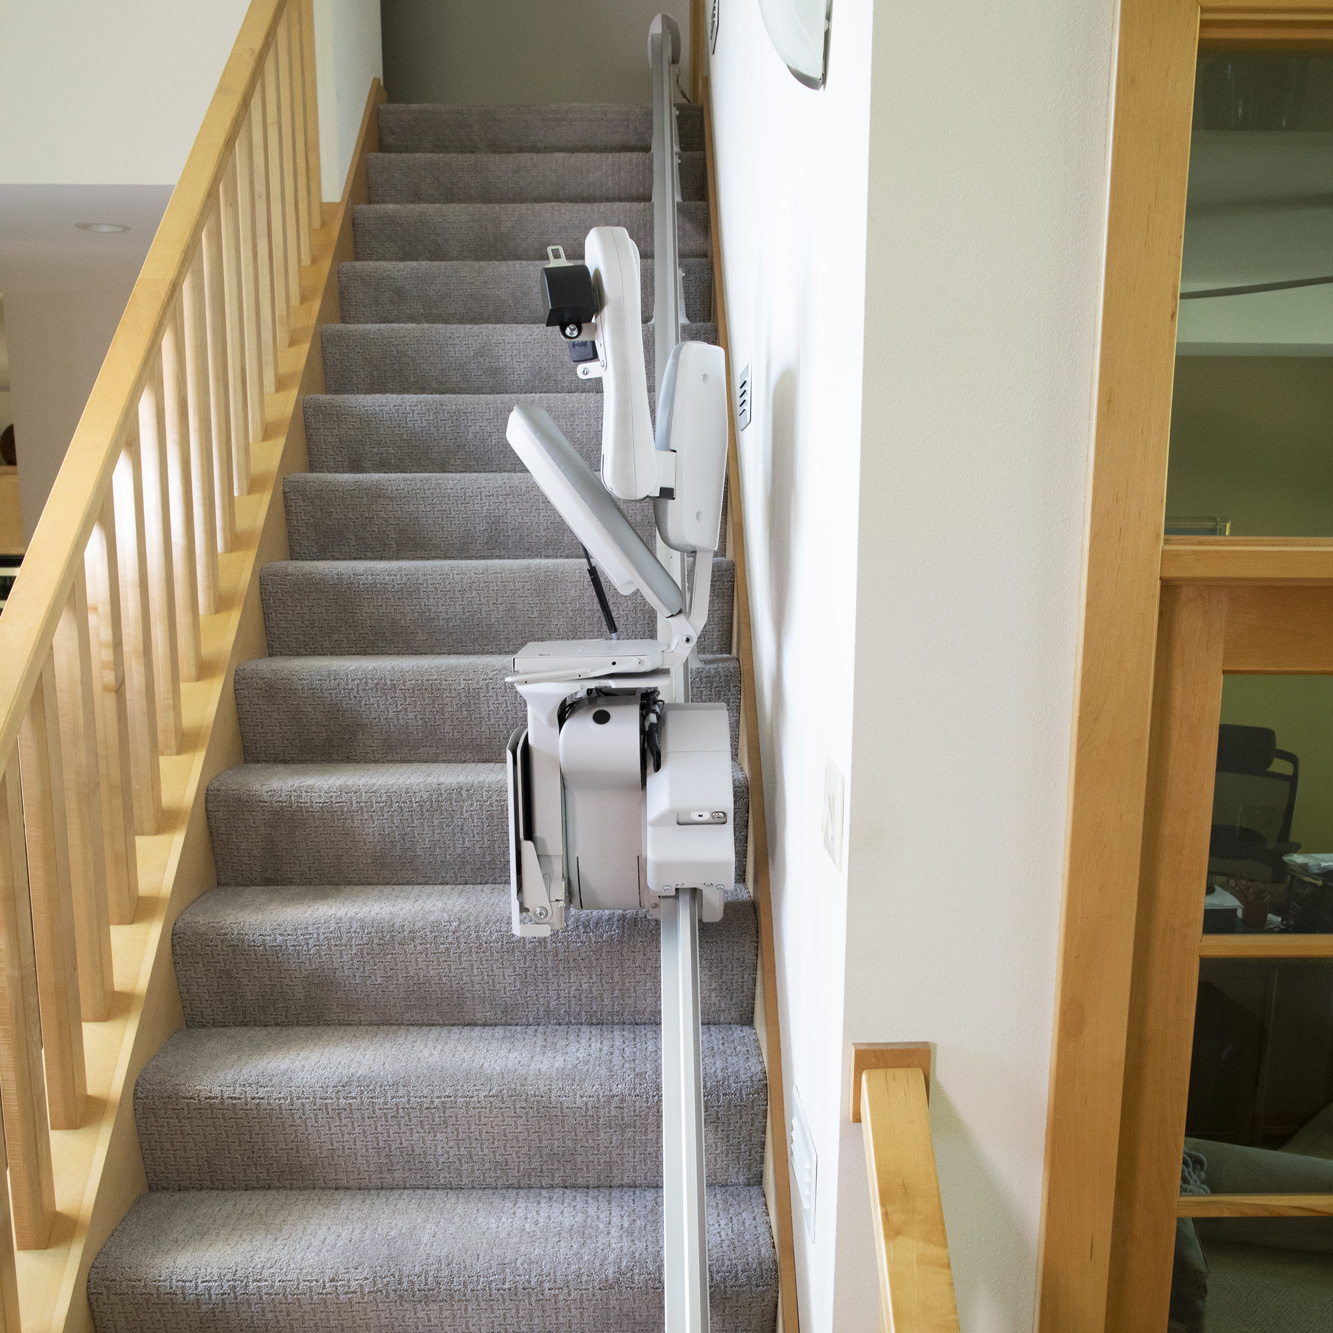 Bruno Elite SRE 2010 Residential and Commercial Straight Rail Stair Lift